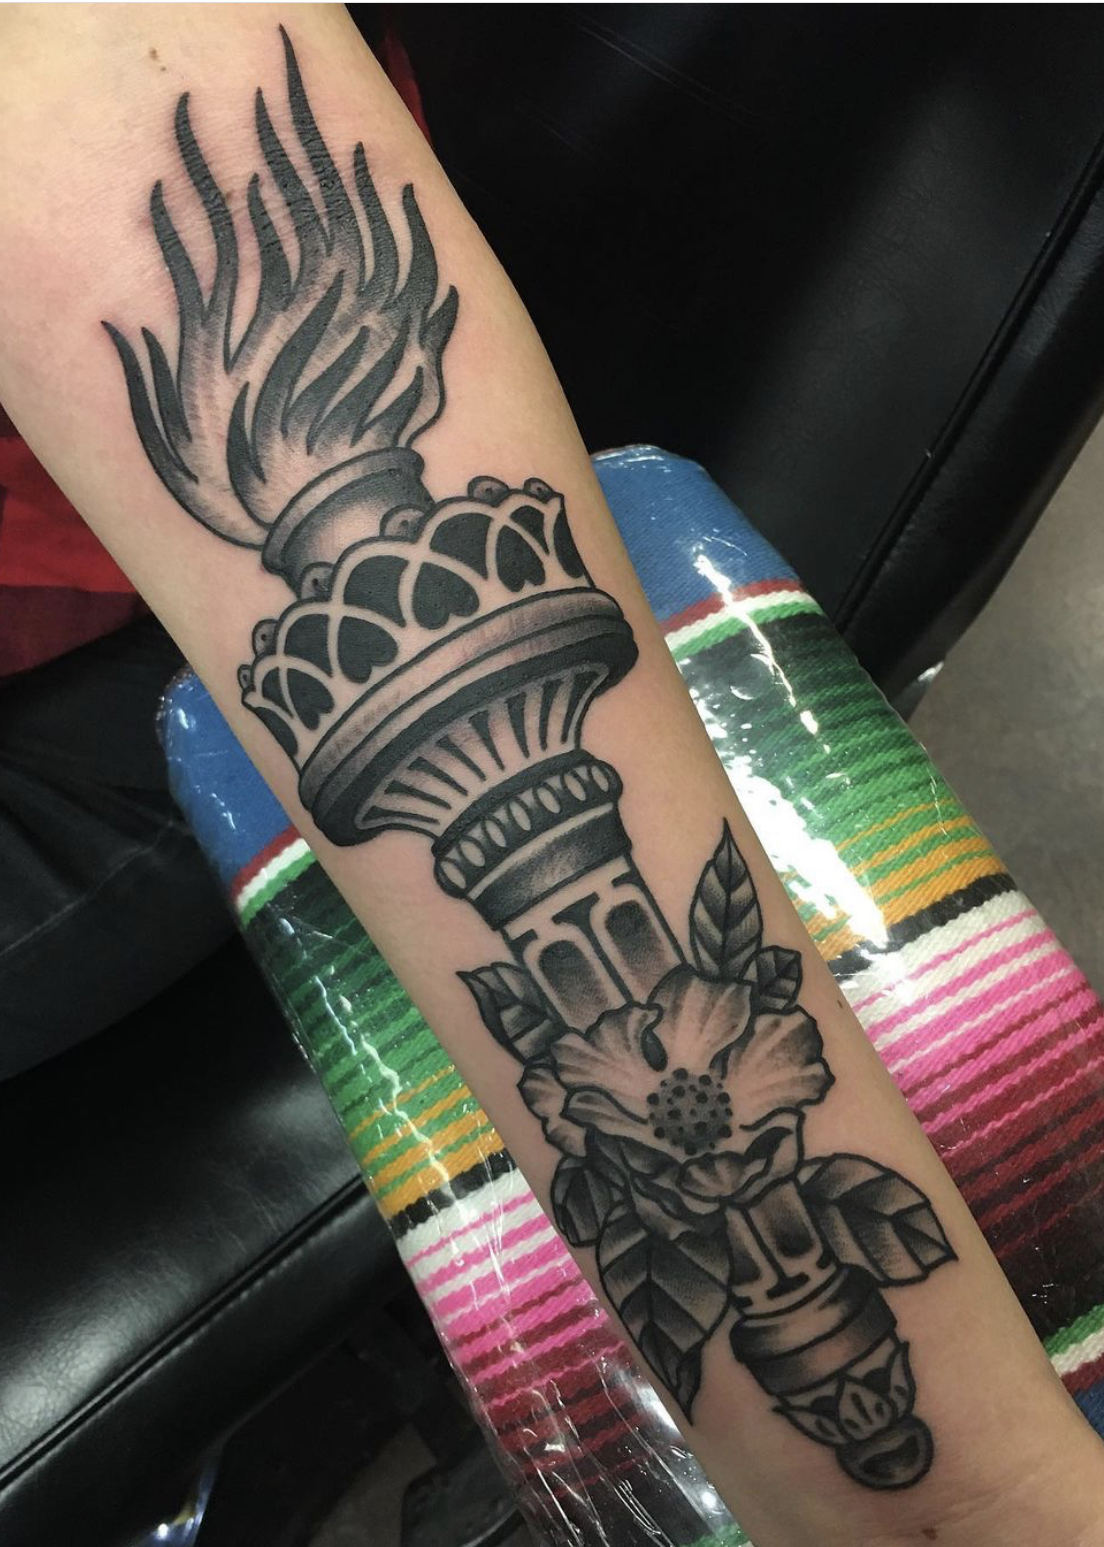 Torch tattoo from shop in Dallas